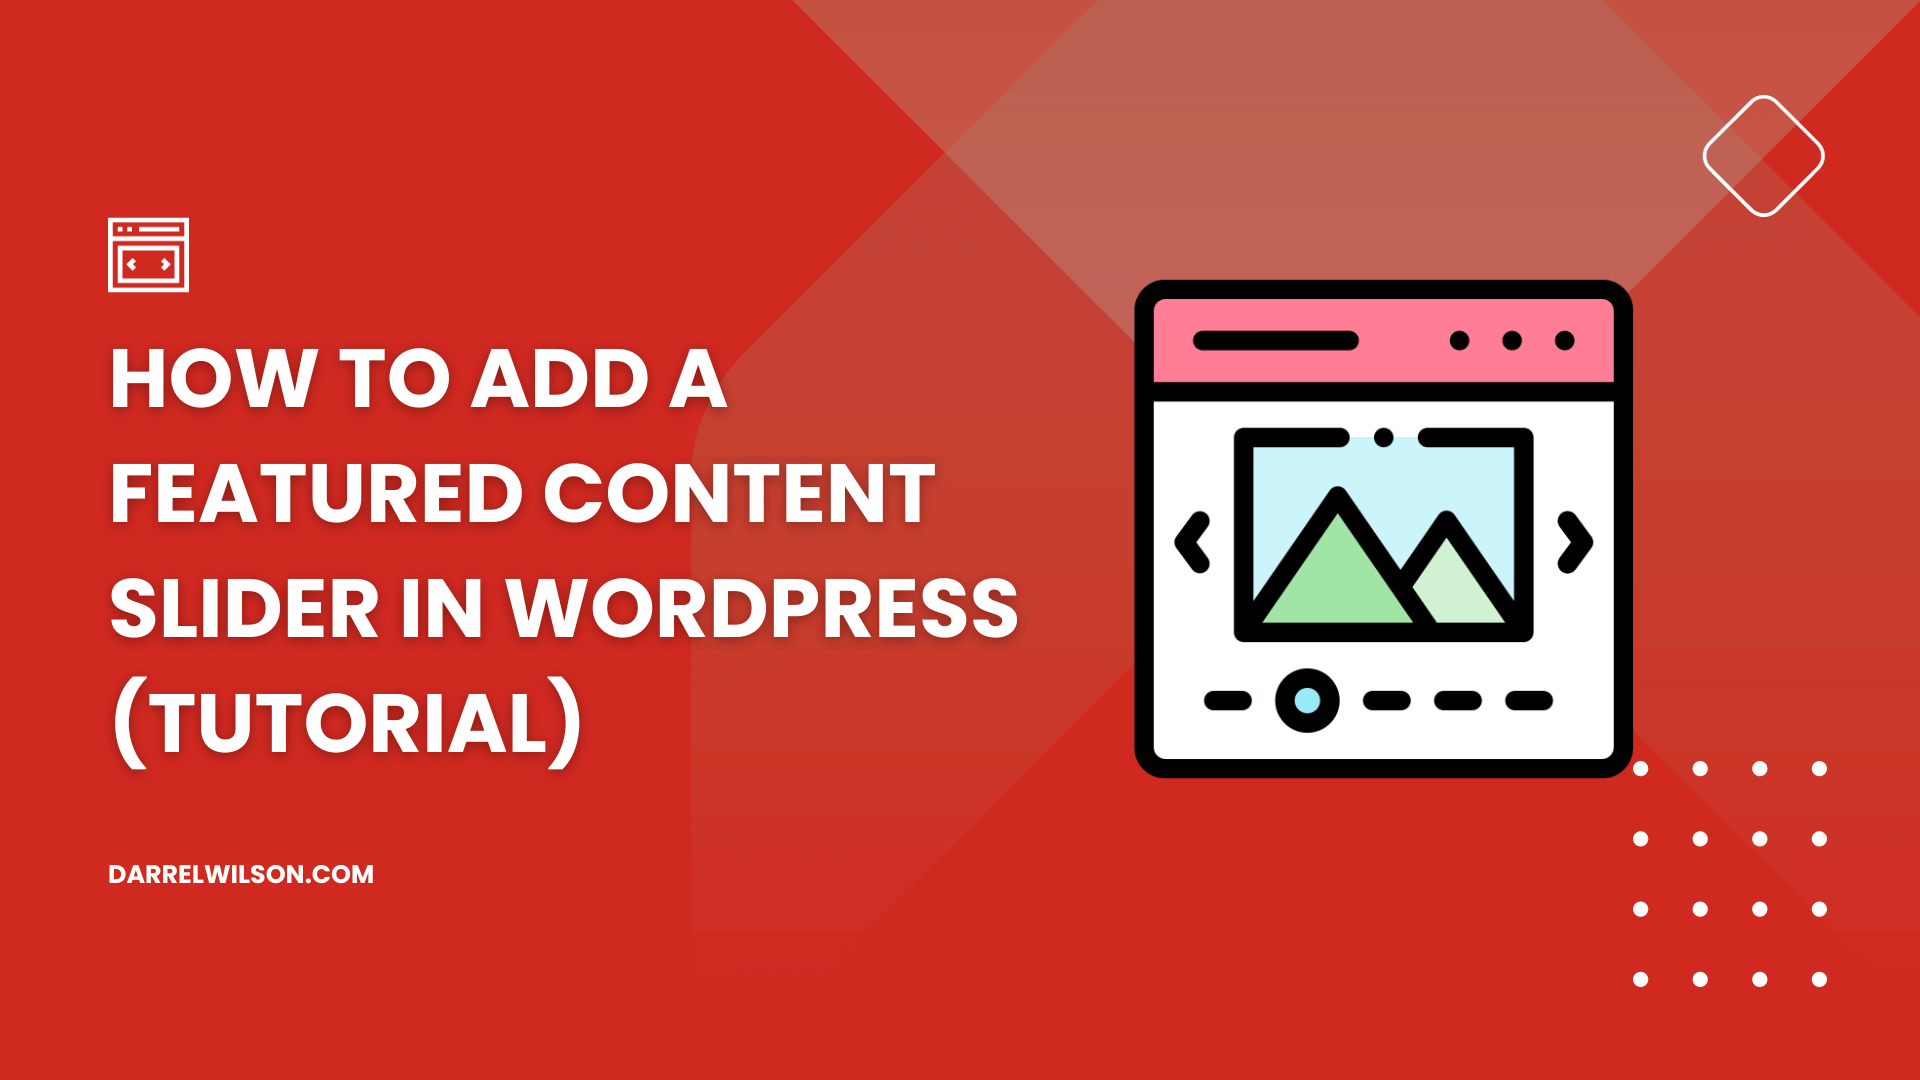 How to Add a Featured Content Slider in WordPress (Tutorial)